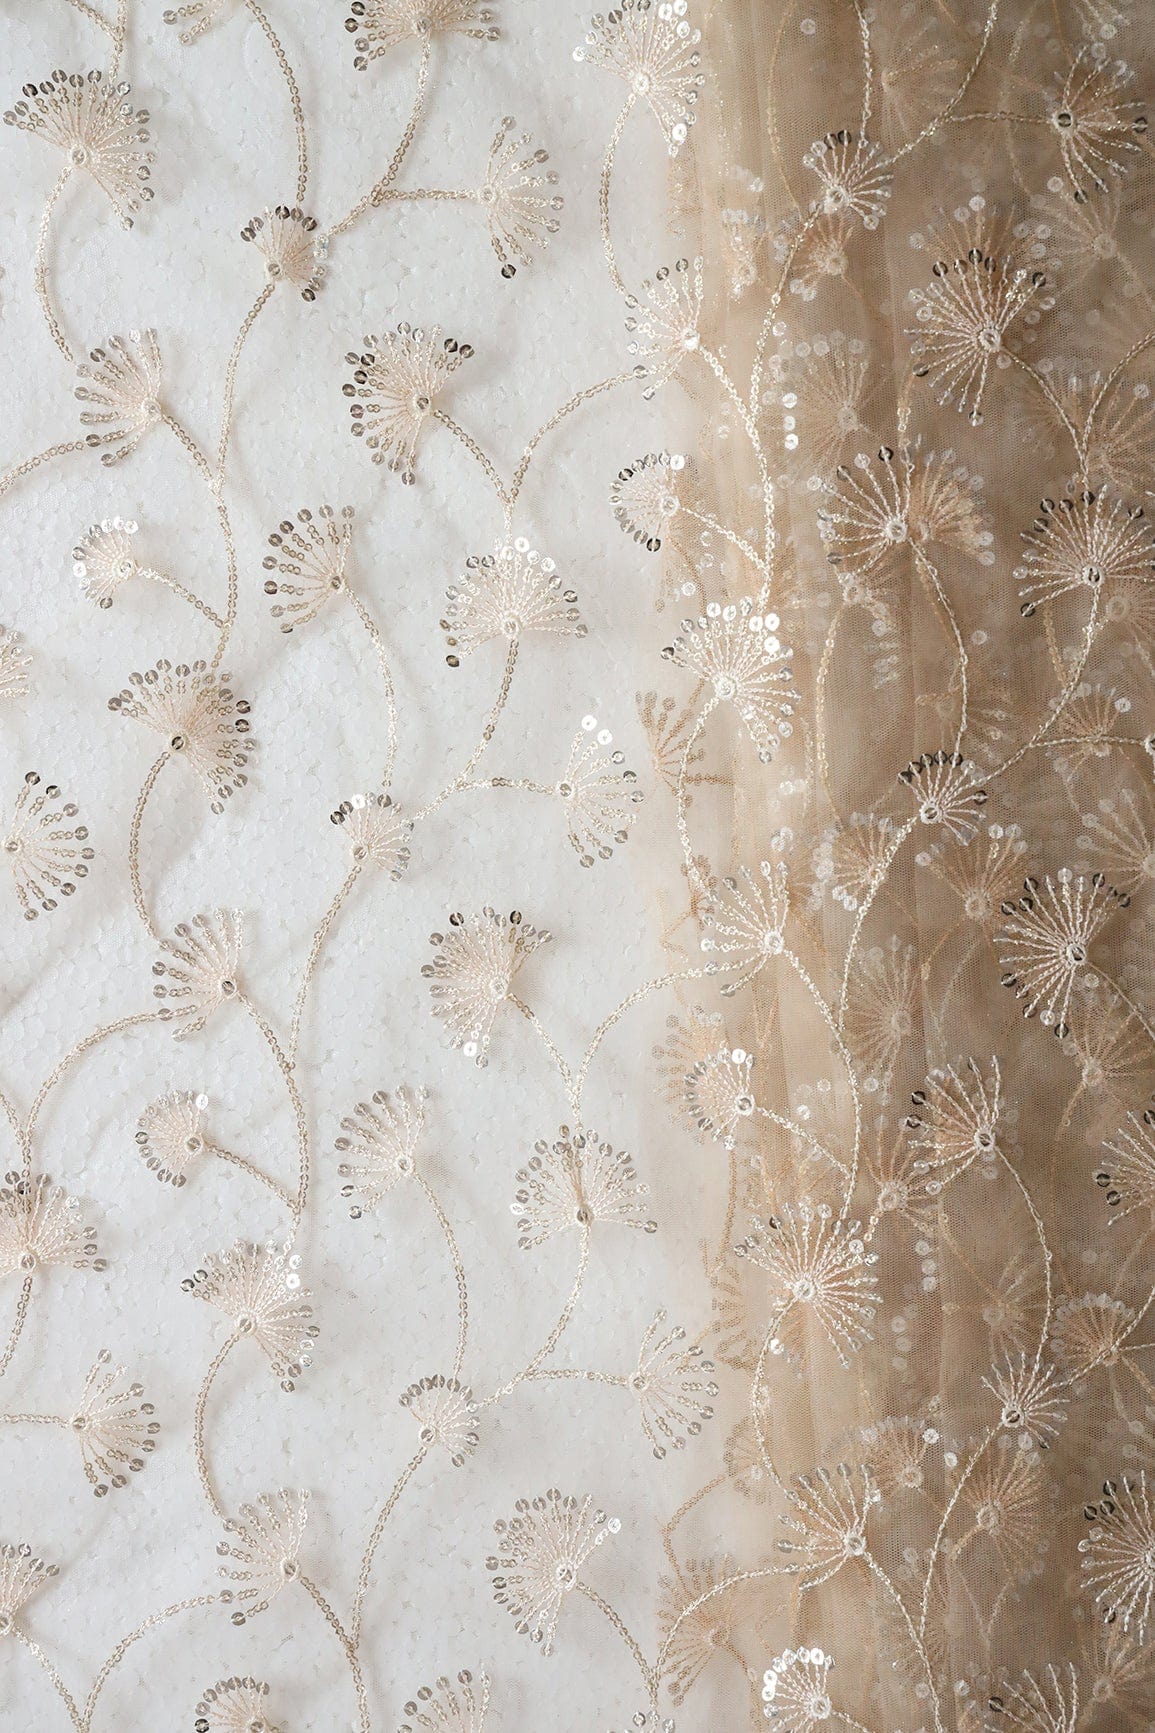 doeraa Embroidery Fabrics Beige Thread With Gold And Silver Sequins Floral Embroidery On Beige Soft Net Fabric